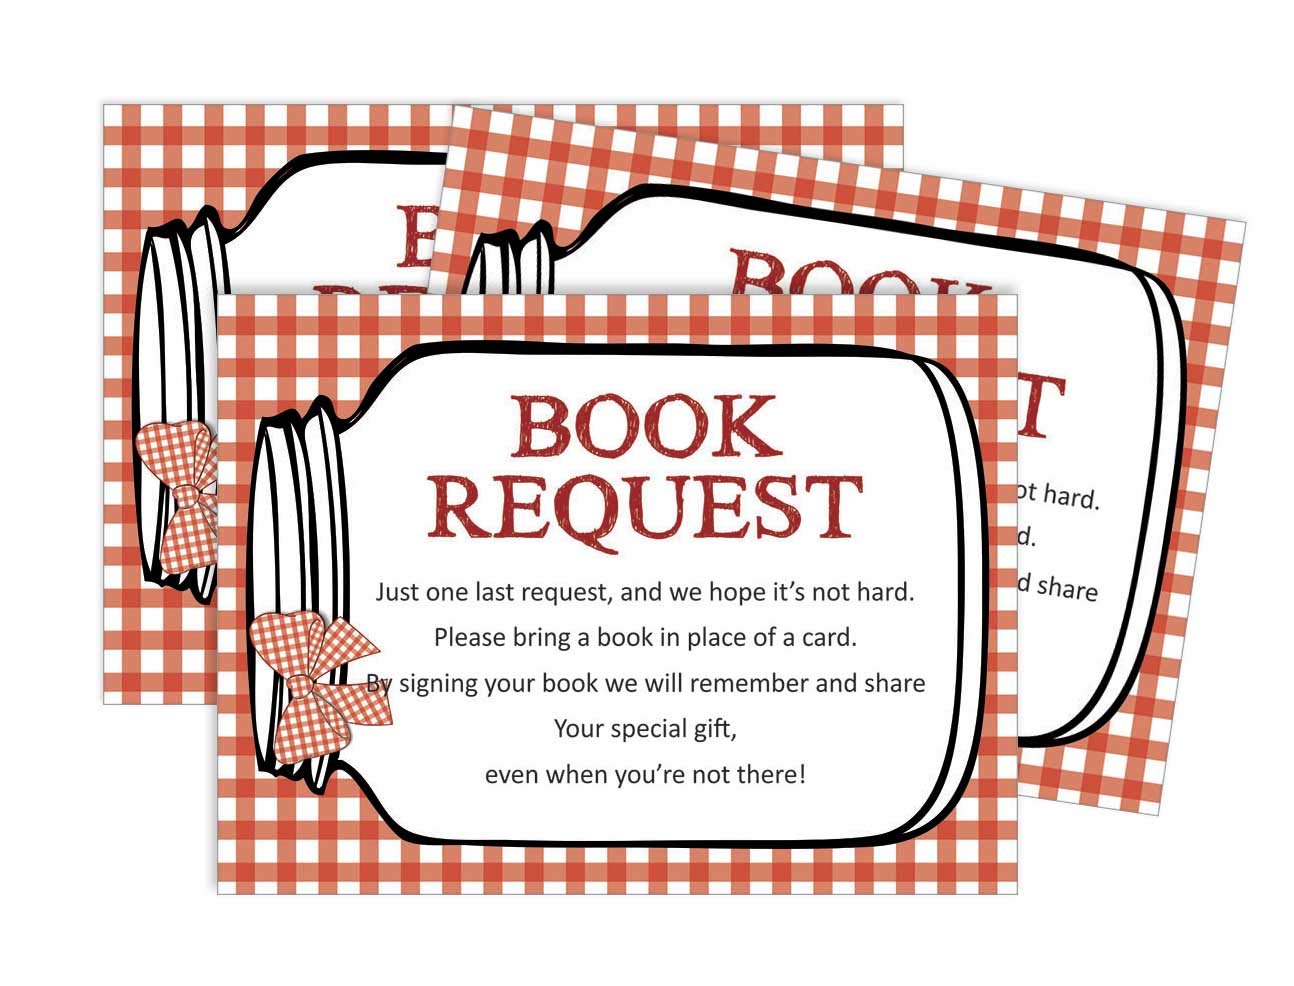 Inkdotpot 30 BBQ Gender Neutral Baby Shower Book Request Cards Bring A Book Instead of A Card Baby Shower Invitations Inserts Games